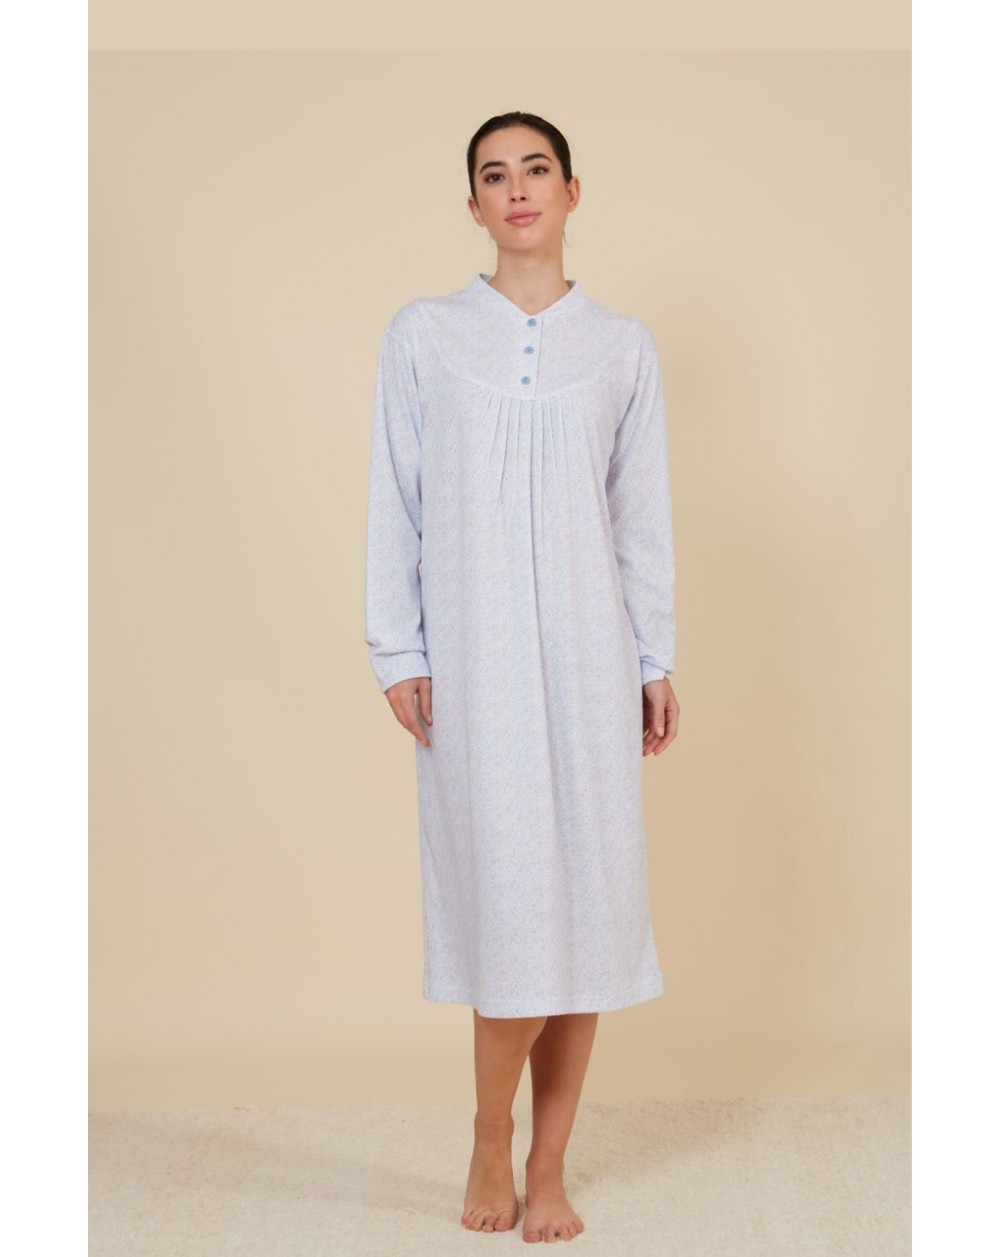 Women's nightdress with liberty print with capacete 